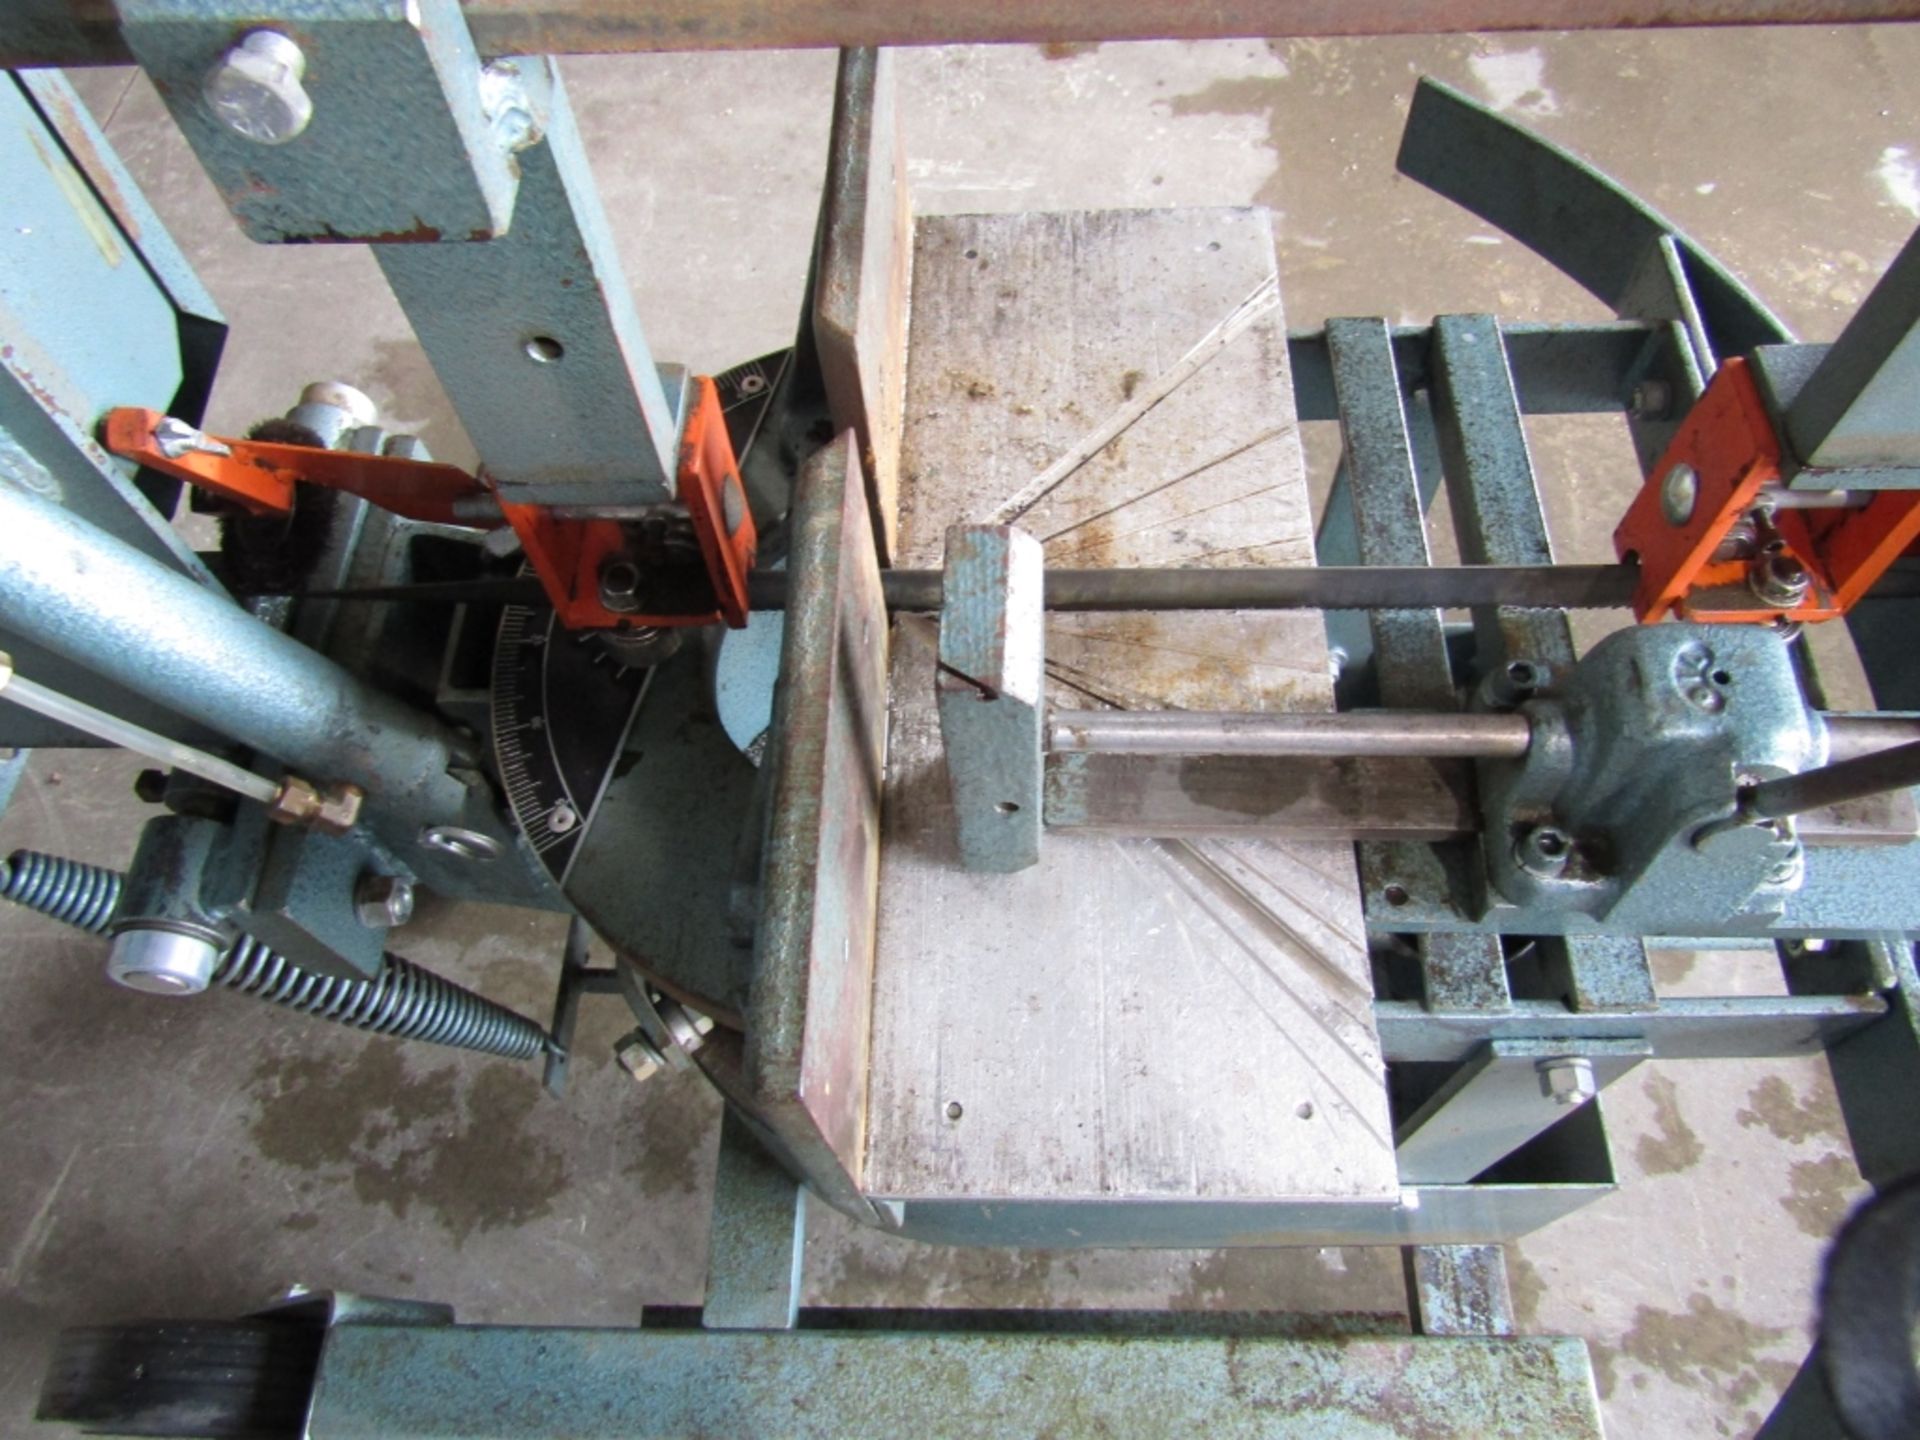 Ellis Mitre Band Saw, Model # 1600, Serial # 16007320, Blade Size 10" x 1" x .035, Cuts 7" @ 45 - Image 3 of 4